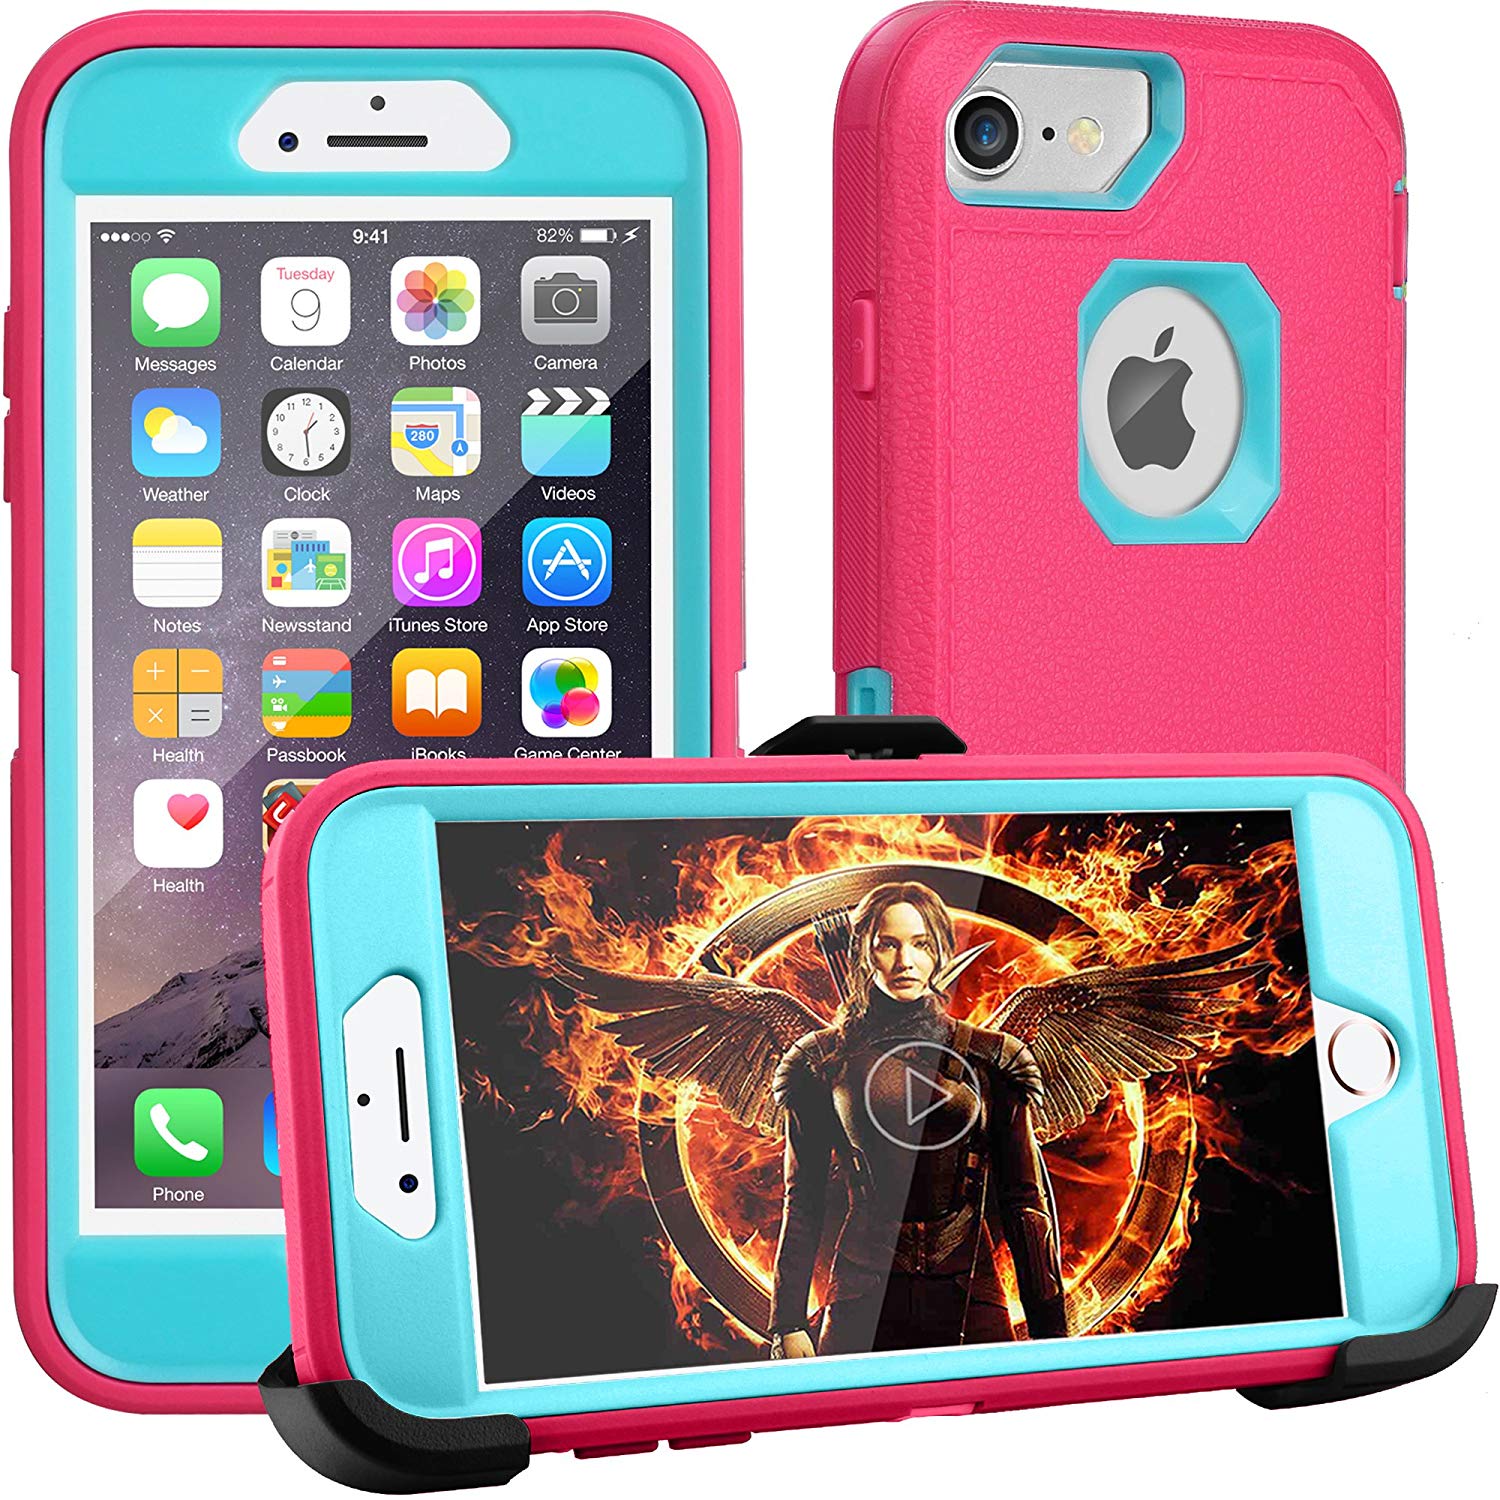 iPhone 8 case,iPhone 7 Case, iPhone 6s Case, FOGEEK [Dust-Proof] Belt-Clip Heavy Duty Kickstand Cover [Shockproof] Rugged Armor PC+TPU Shell for Apple iPhone 7 and iPhone 6/6s (Rose and Blue)